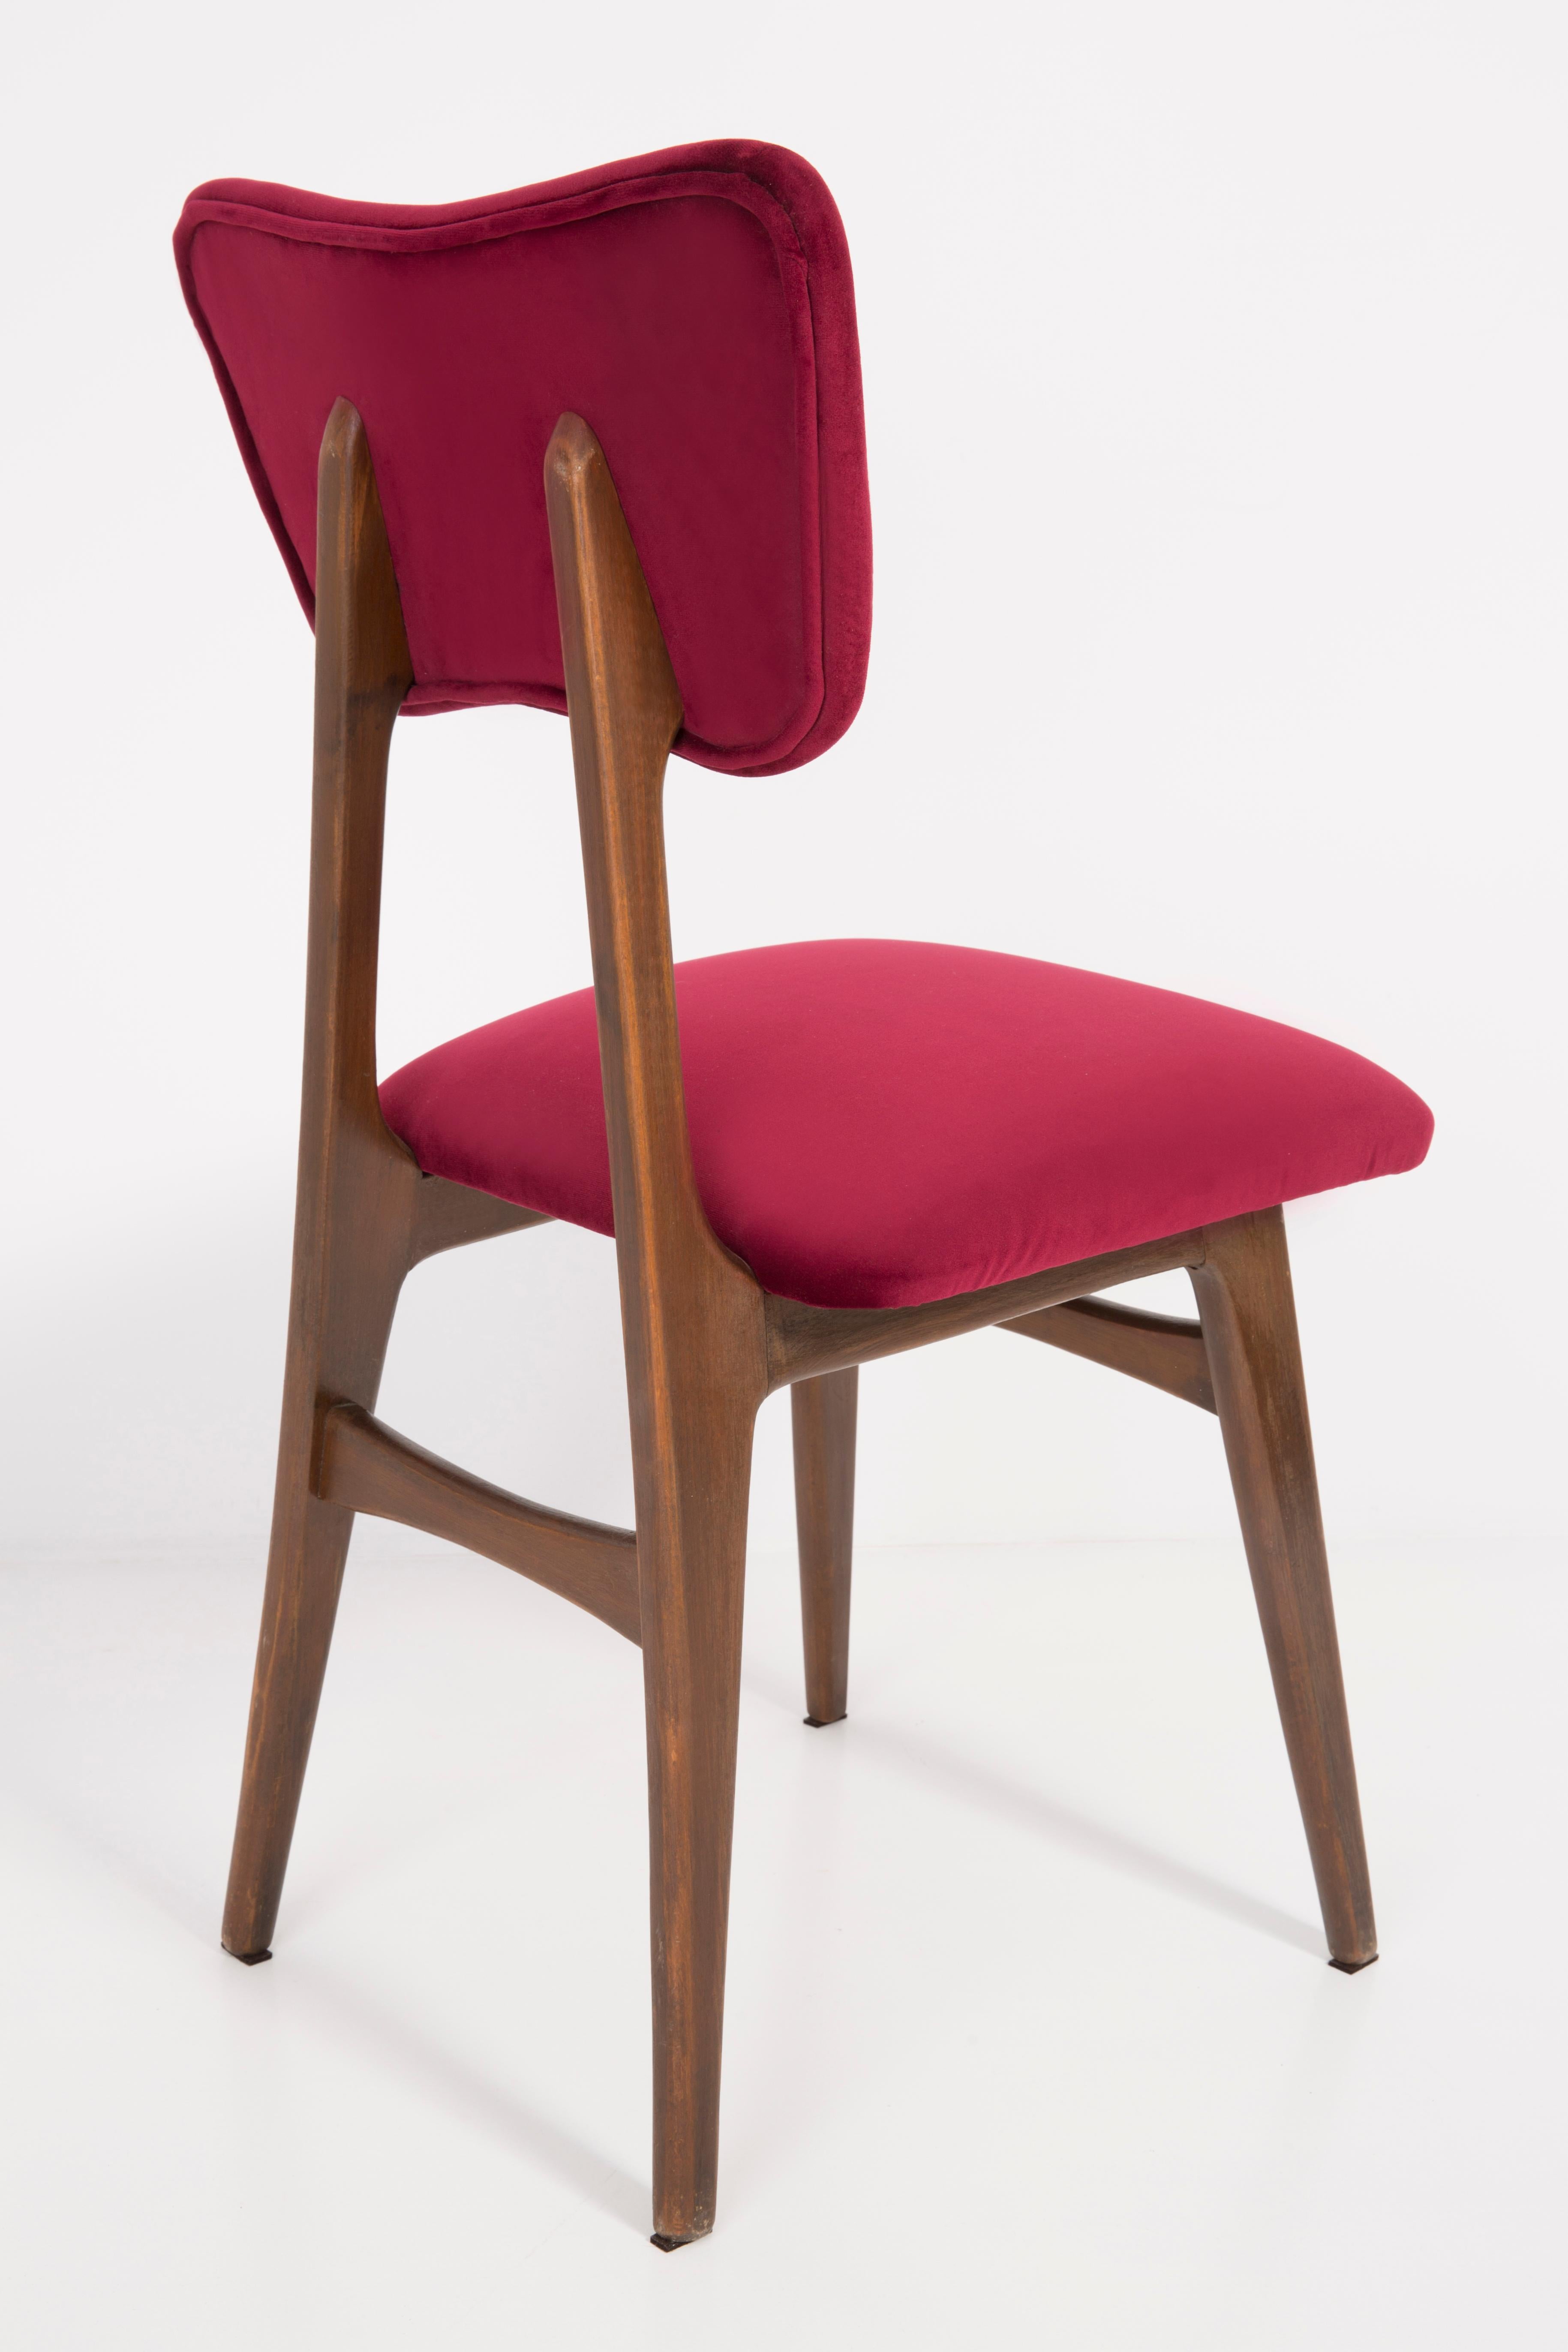 Hand-Crafted 20th Century Burgundy Red Chair, 1960s For Sale